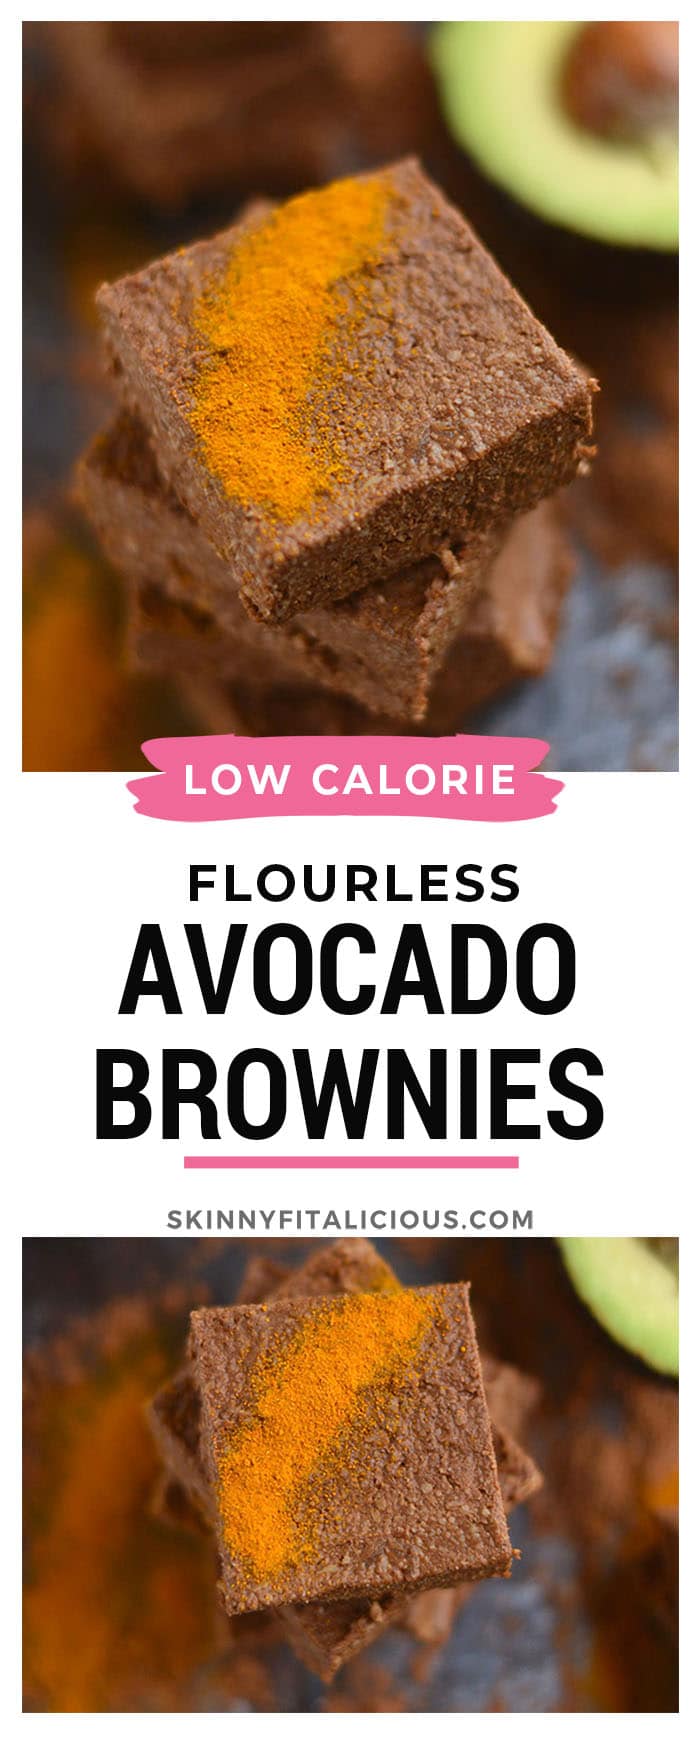 Fudgy Chocolate Avocado Brownies naturally sweetened and loaded with antioxidants. A delicious and healthy way to satisfy a sweet tooth! Vegan + Paleo + Gluten Free